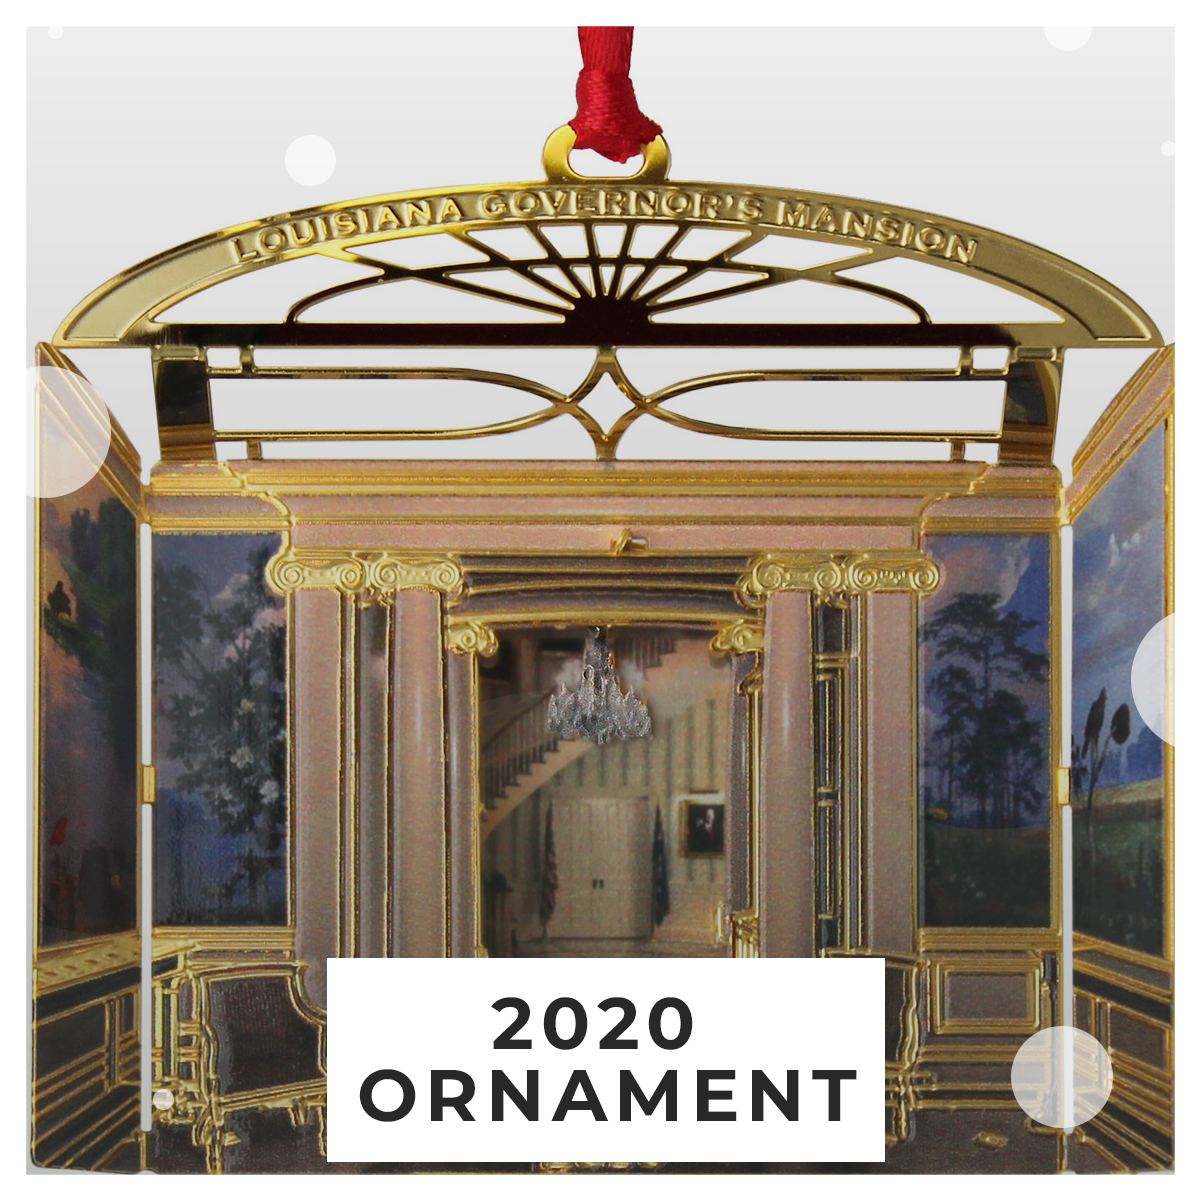 Governor’s Mansion Ornament 2020